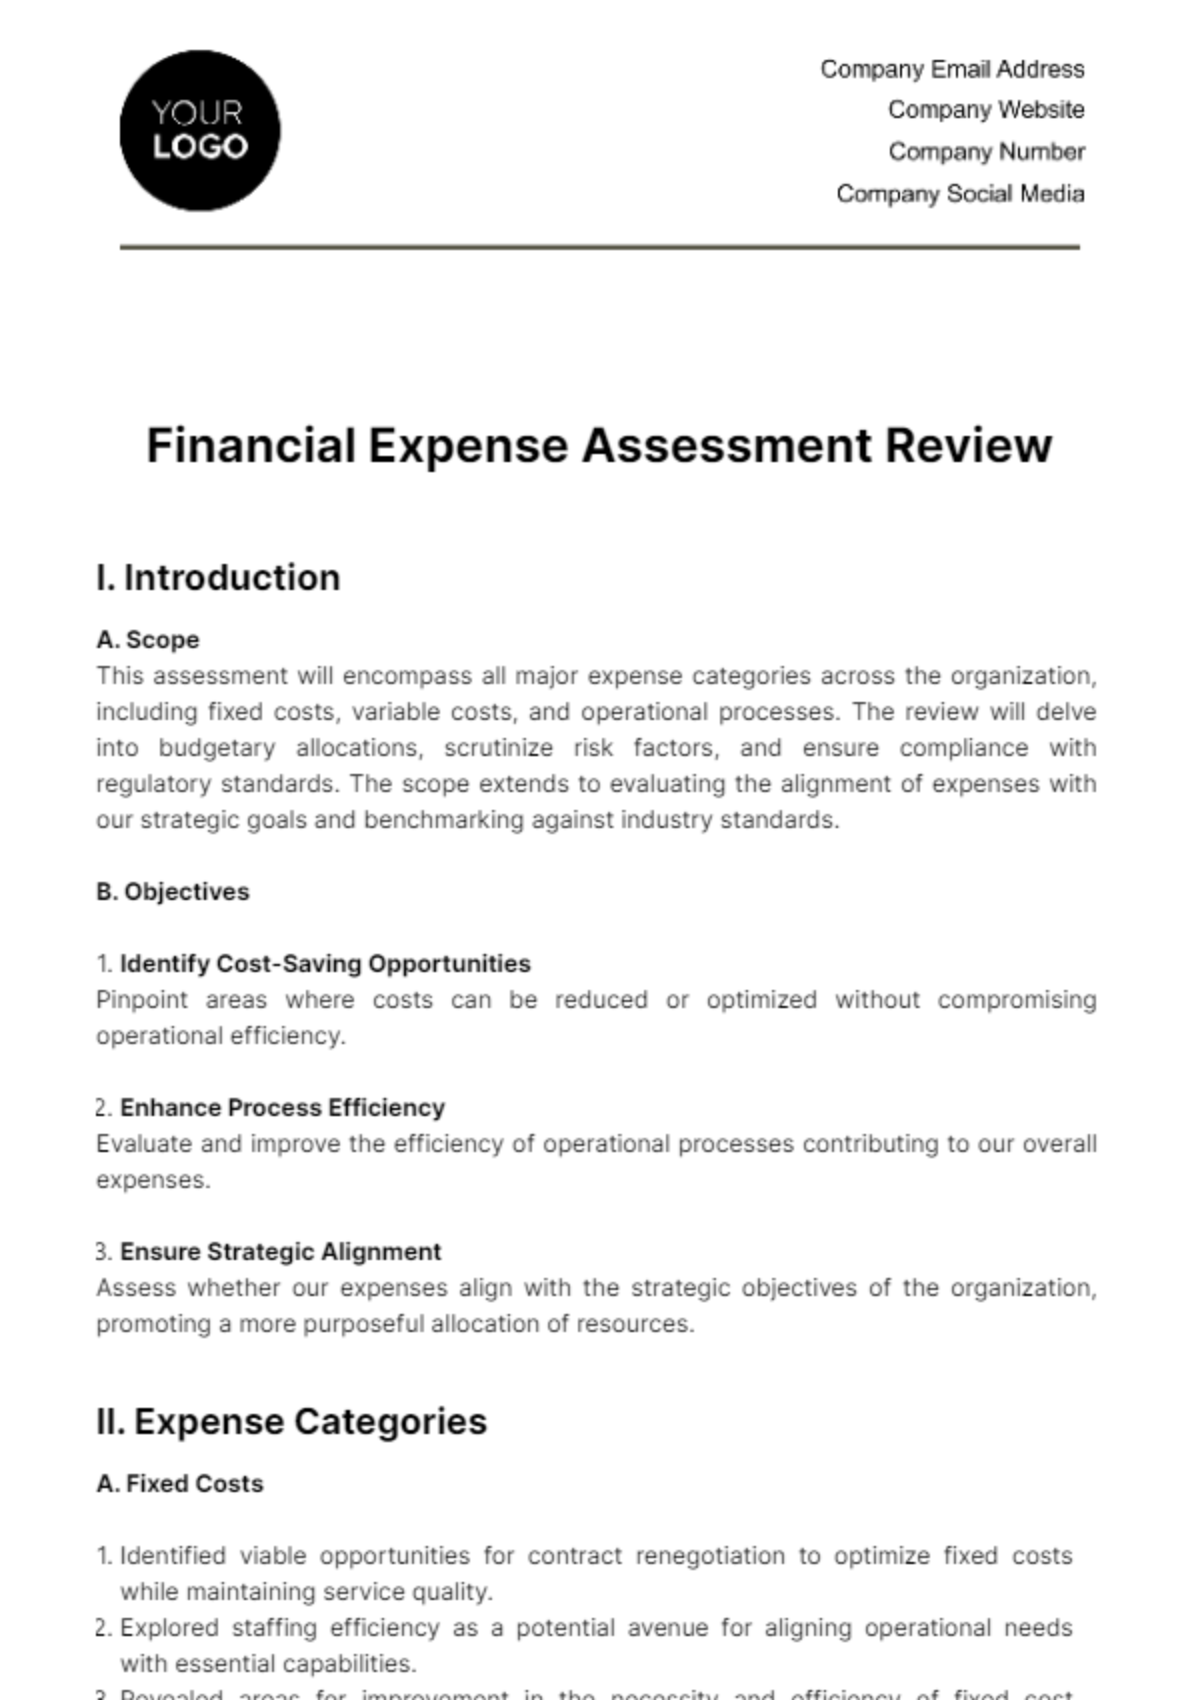 Financial Expense Assessment Review Template